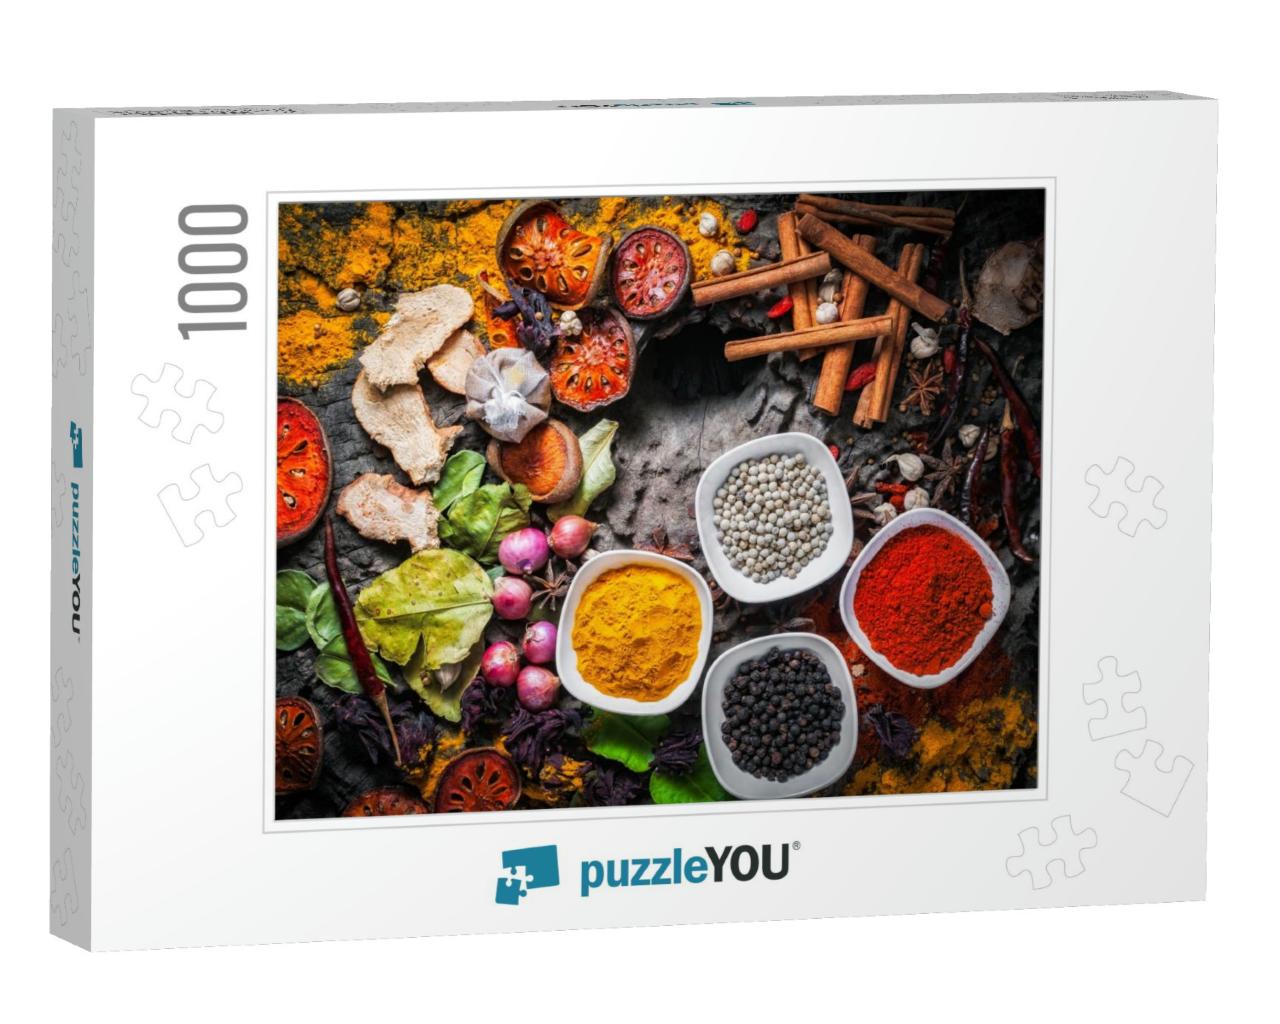 Selection of Spices Herbs & Ingredients for Cooking, Food... Jigsaw Puzzle with 1000 pieces